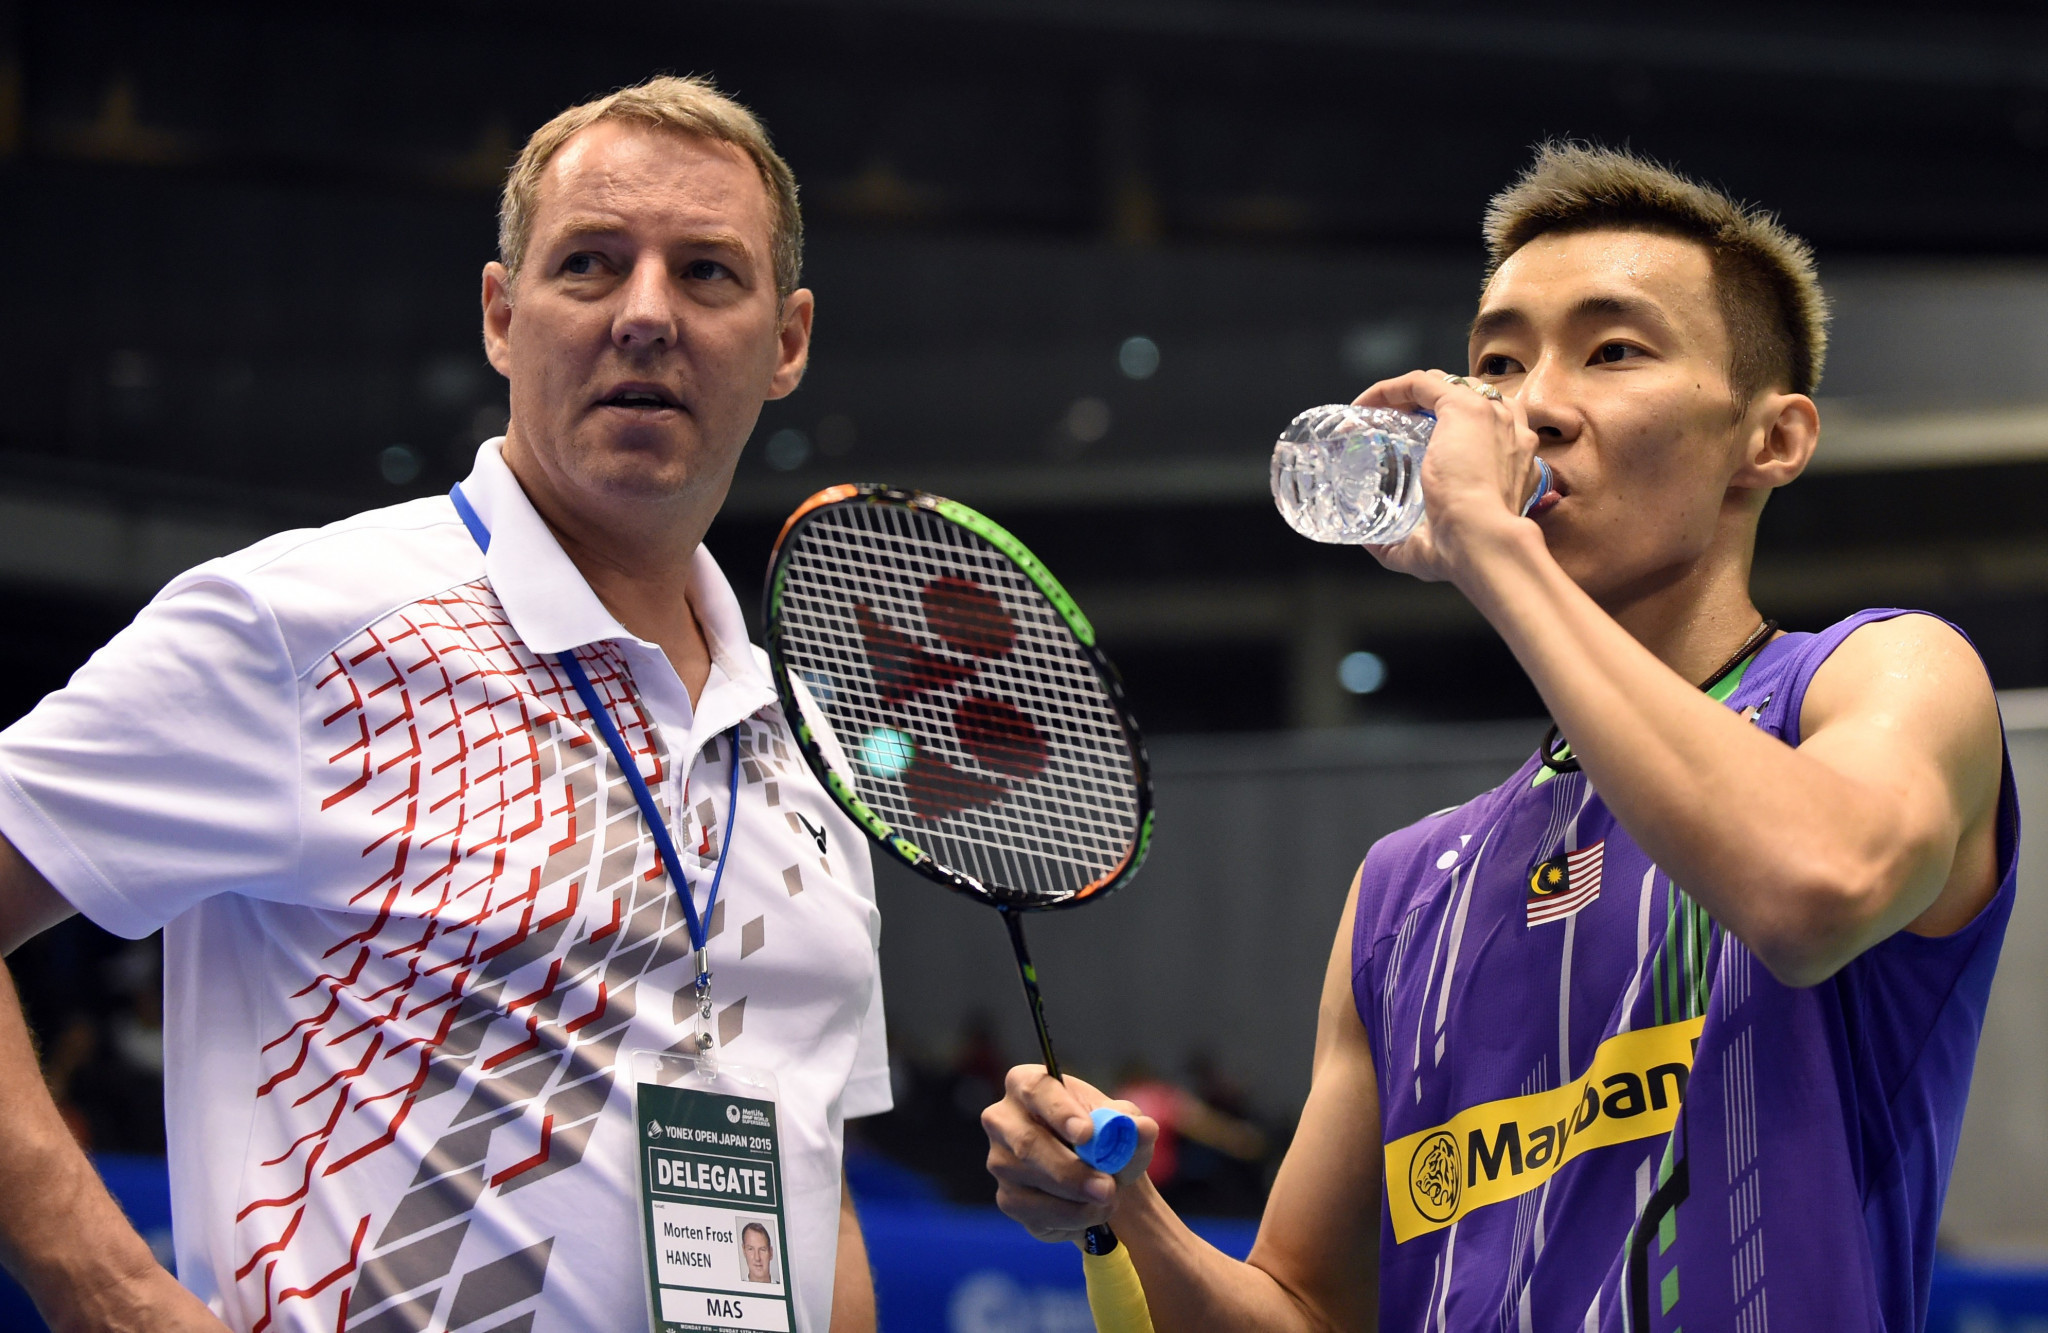 Denmark's former world number one player Morten Frost, who took over as Badminton England's performance director in March, has hailed the shift towards developing across "all five disciplines" ©Getty Images 